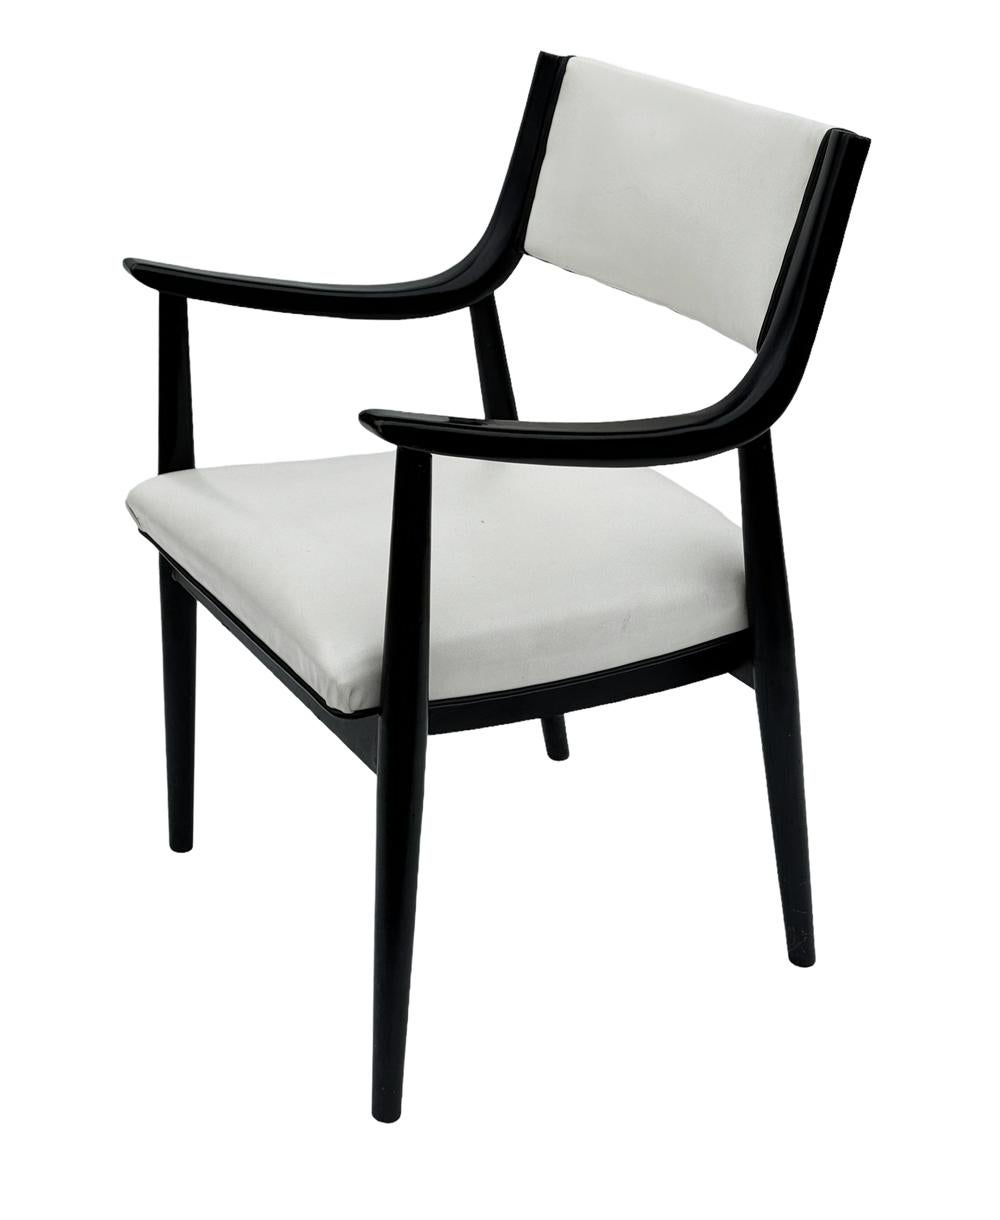 Pair of Mid-Century Modern Black Lacquer Danish Modern Style Armchairs in White For Sale 7